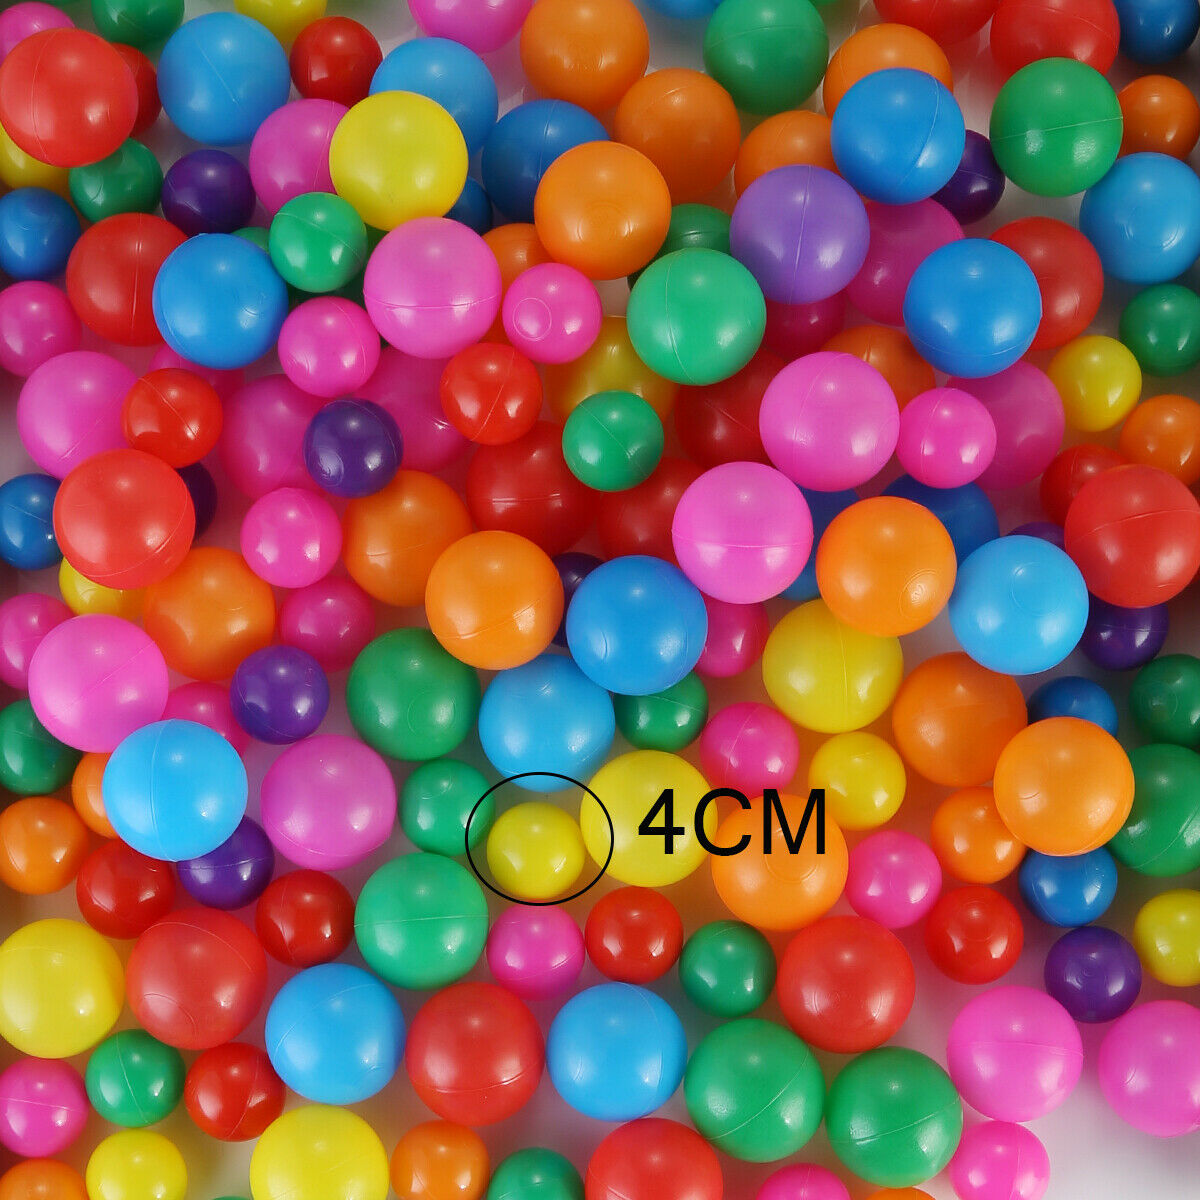 100x Colorfull Soft Plastic Ocean Ball Funny Baby Kids Swim Pit Pool Toys 1.57in